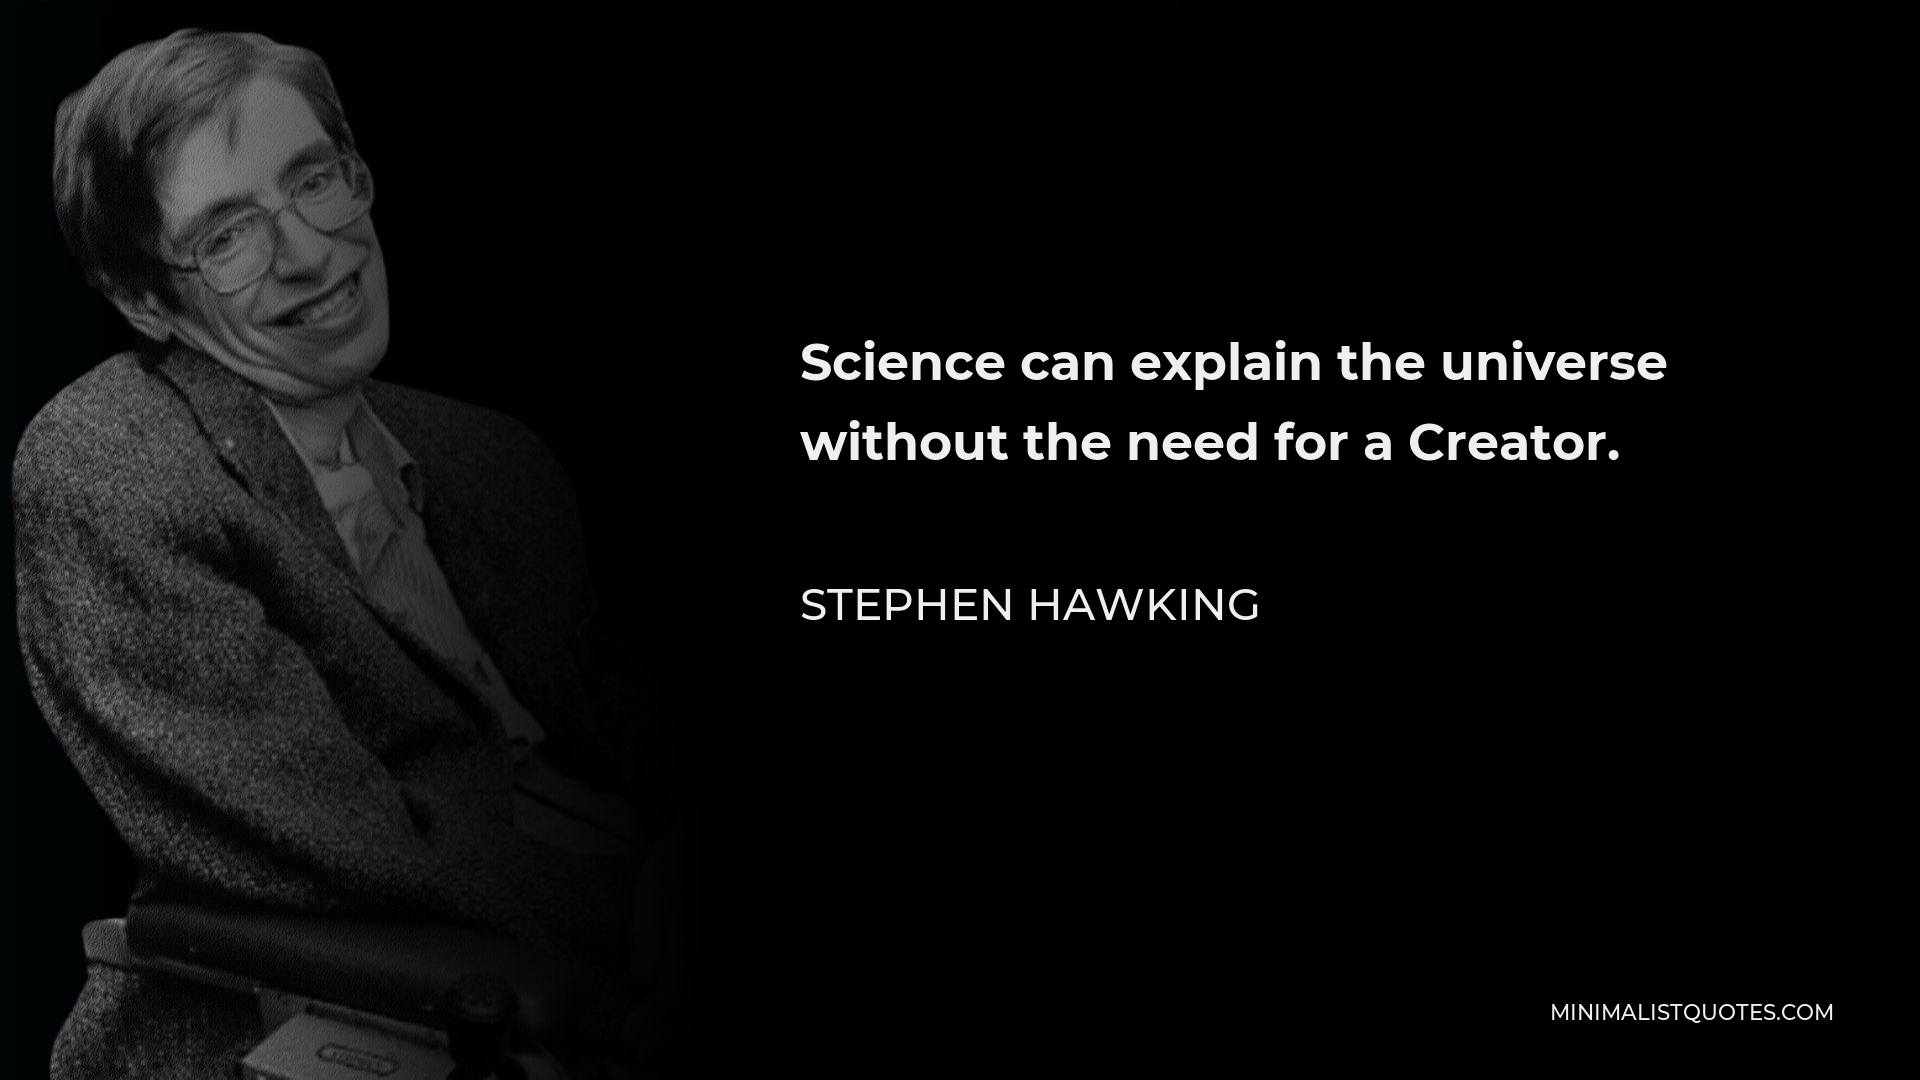 Stephen Hawking Quote - Science can explain the universe without the need for a Creator.